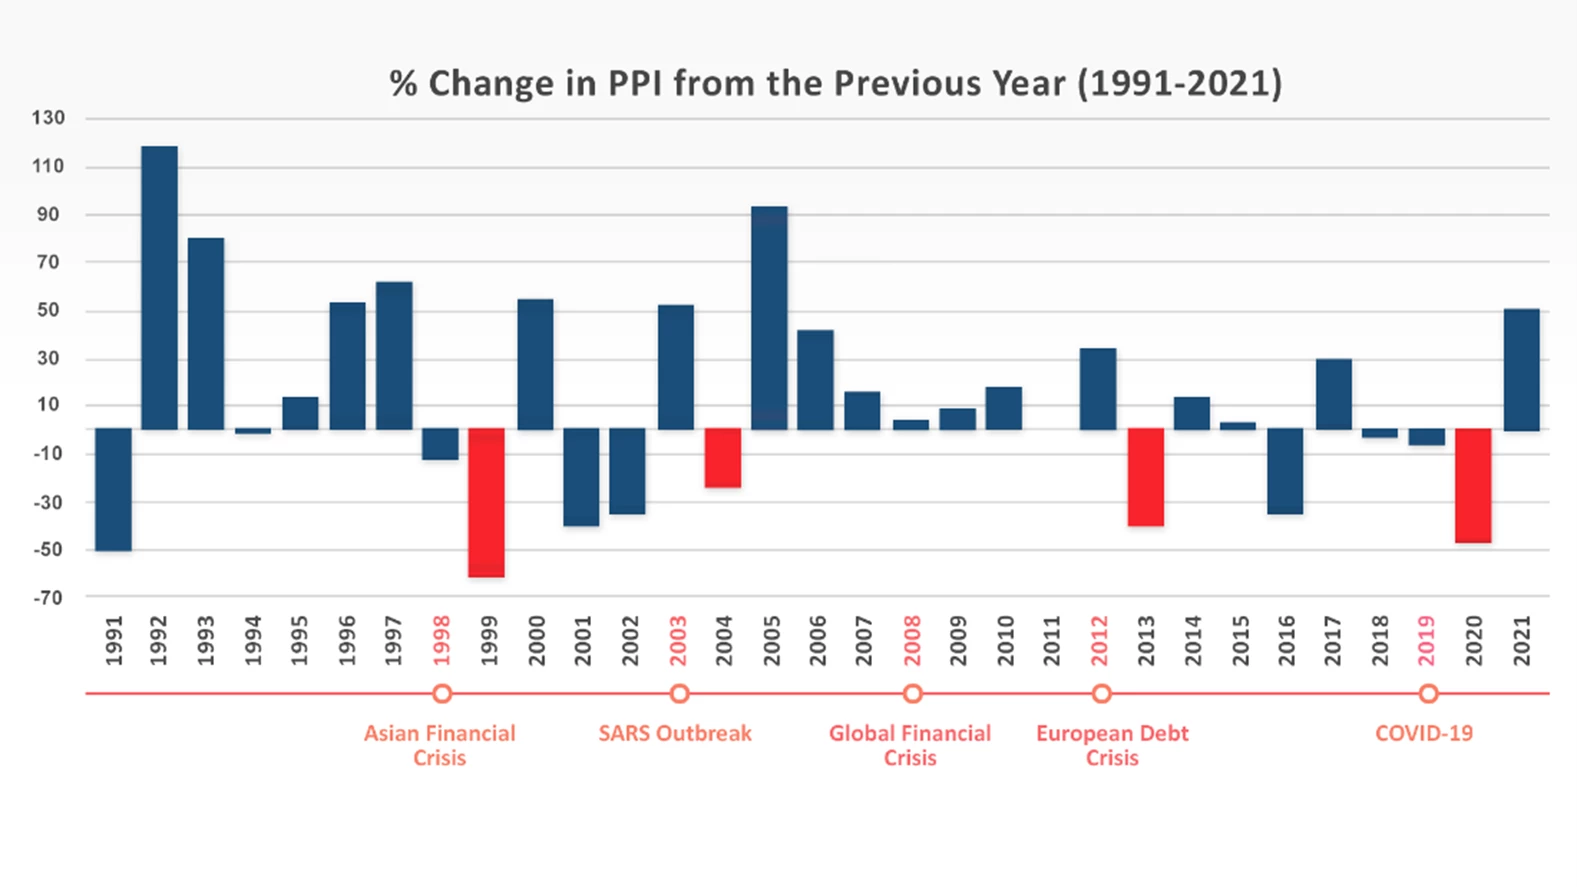 Percent change in PPI from 1991 to 2021